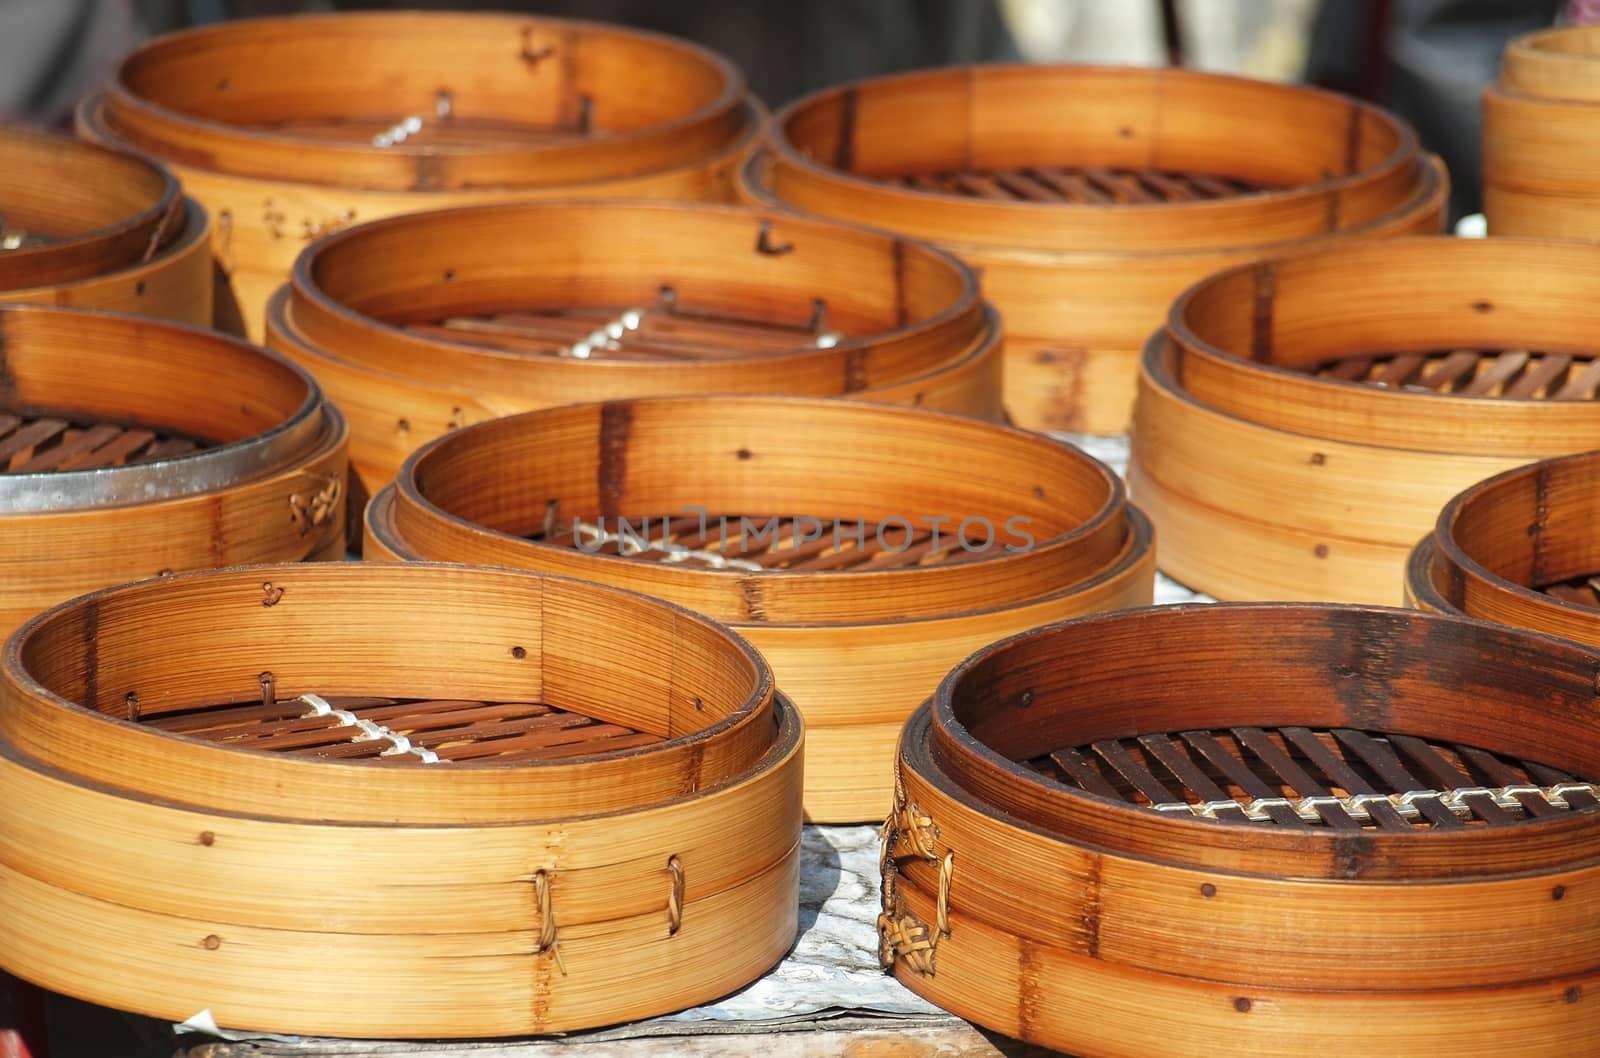 Traditional Chinese bamboo steamers used to make dumplings and steamed bread are drying in the sun